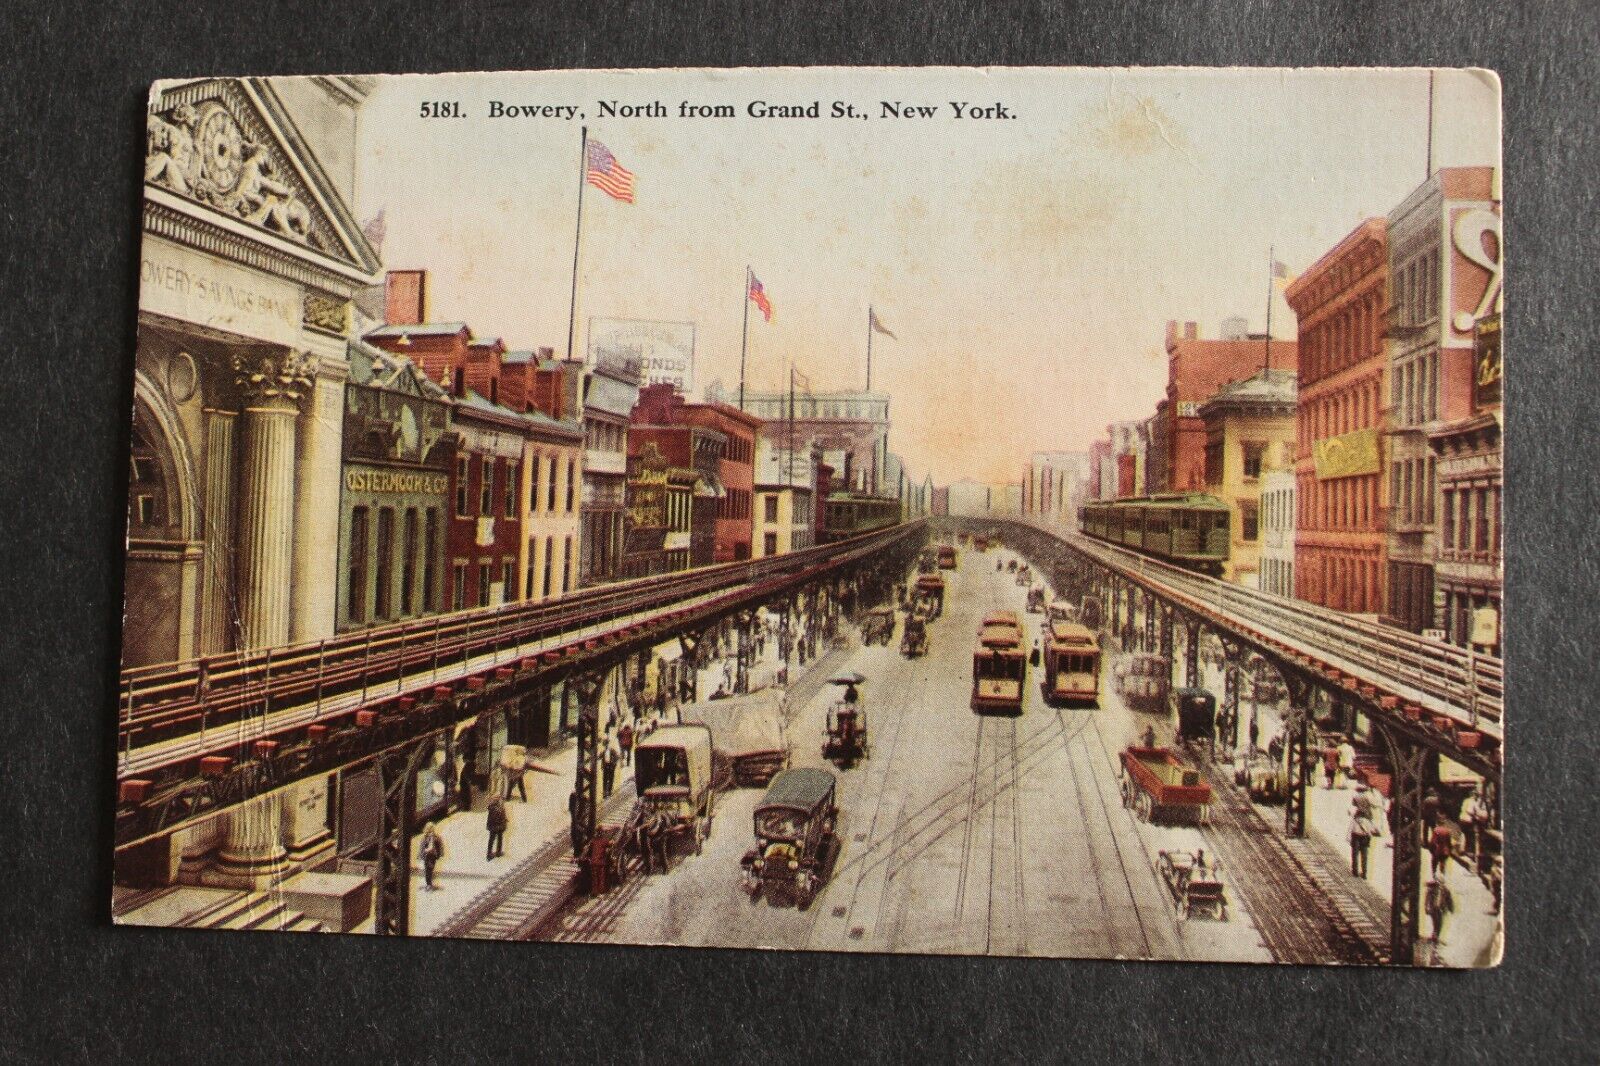 A New York City Postcard  Bowery, North from Grand Street